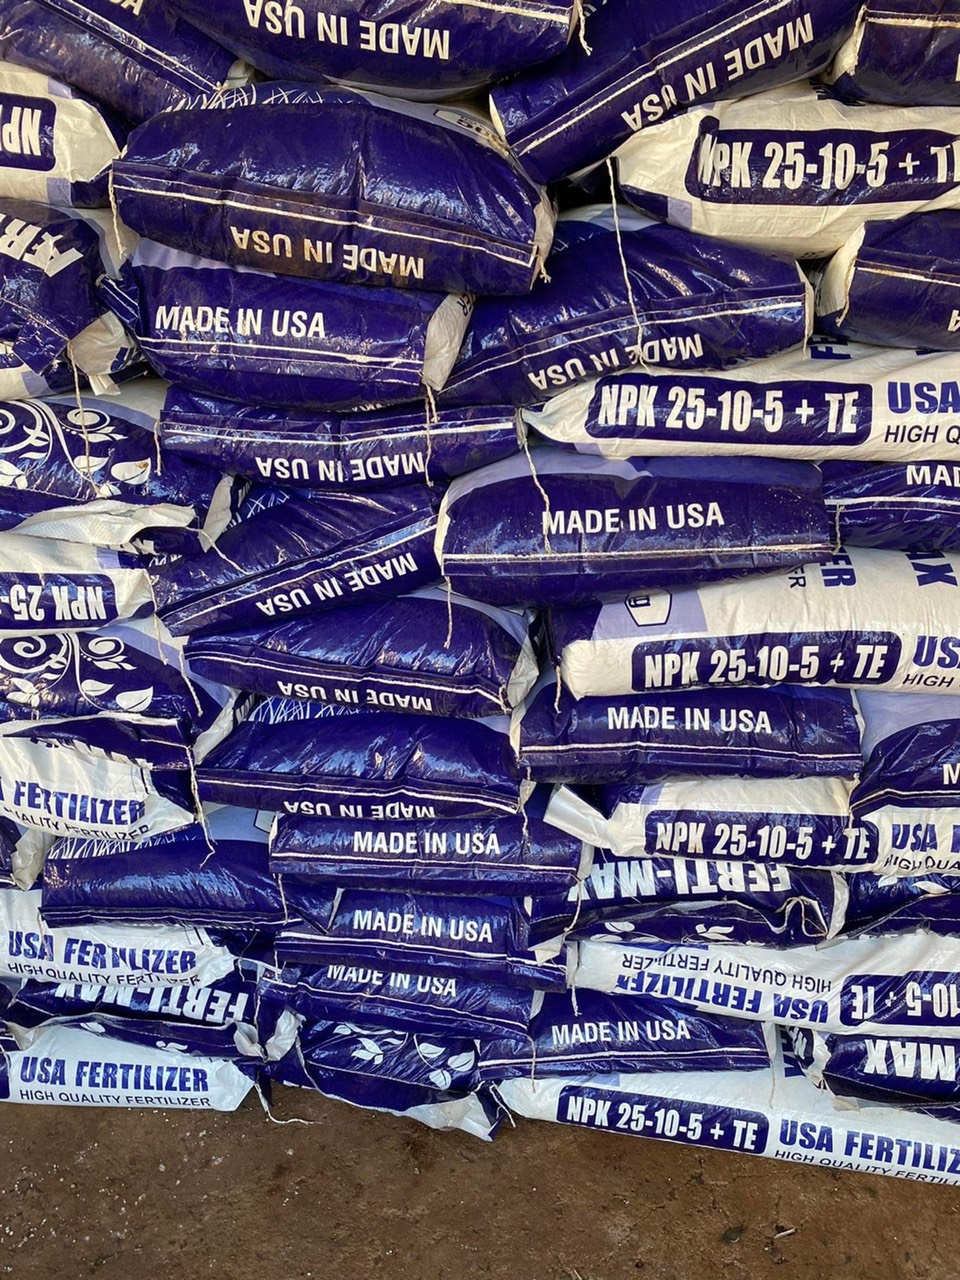 Man held for producing over 100 tonnes of counterfeit fertilizer in Vietnam